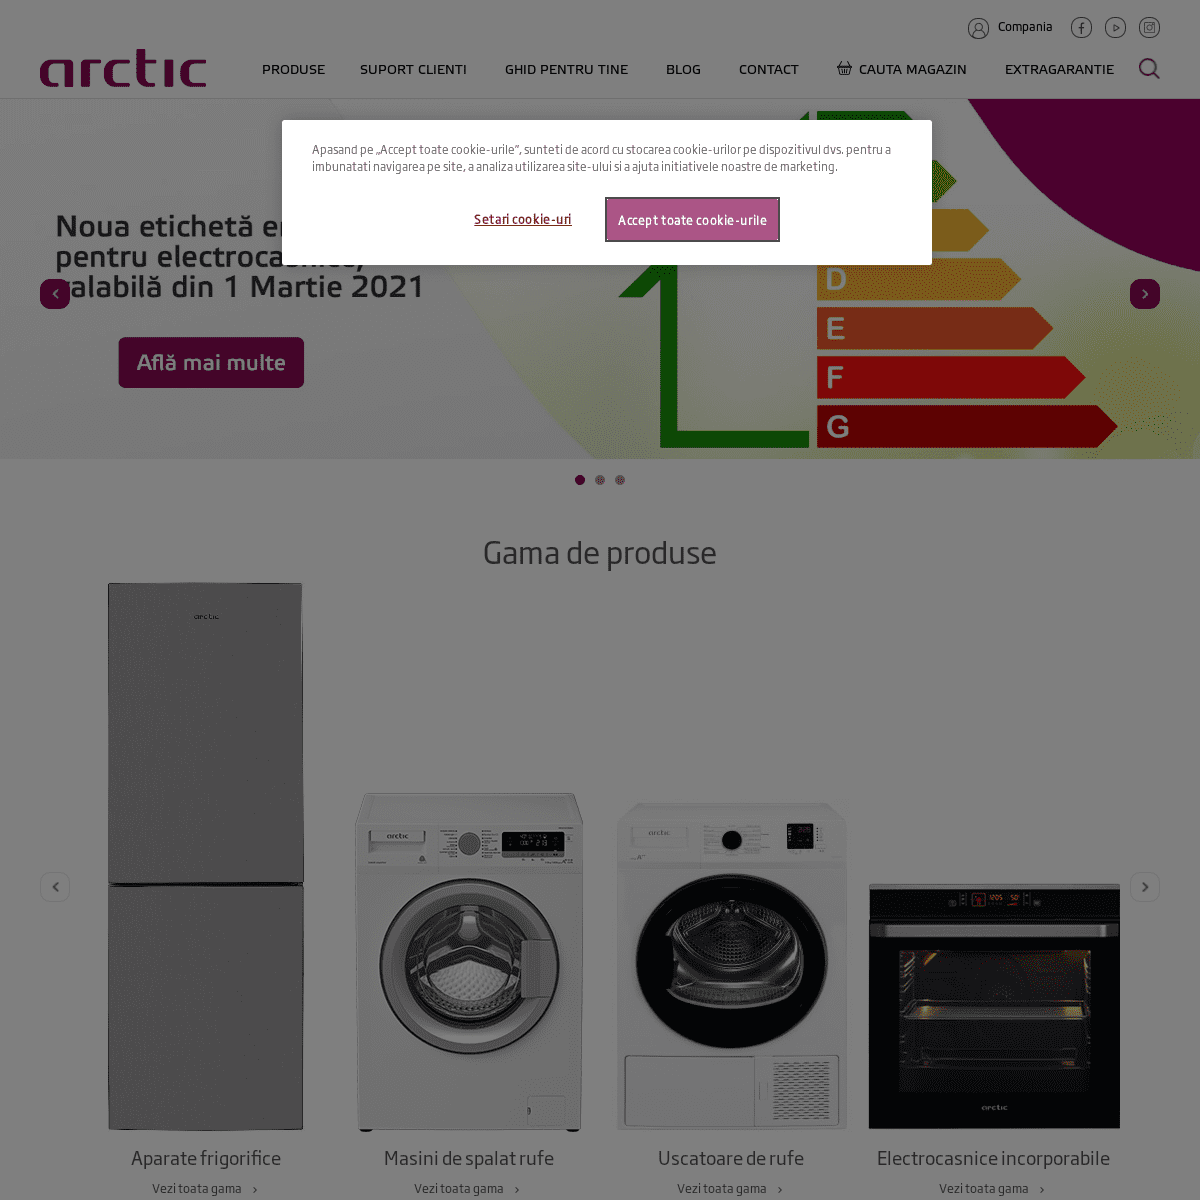 A complete backup of https://arctic.ro